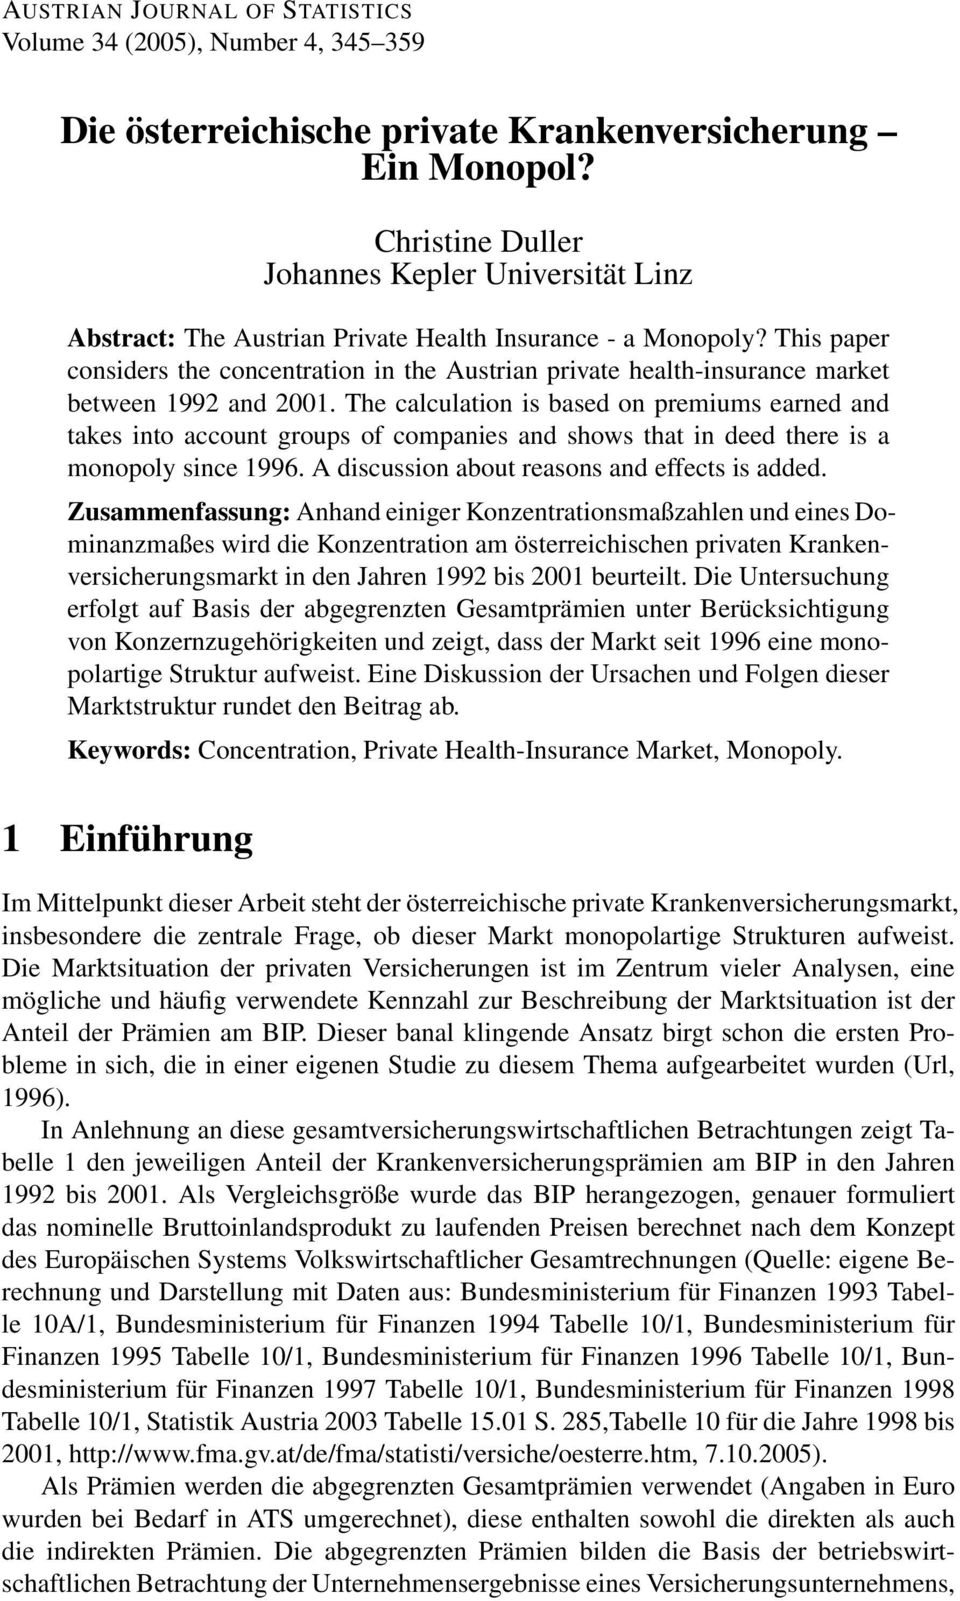 This paper considers the concentration in the Austrian private health-insurance market between 1992 and 2001.